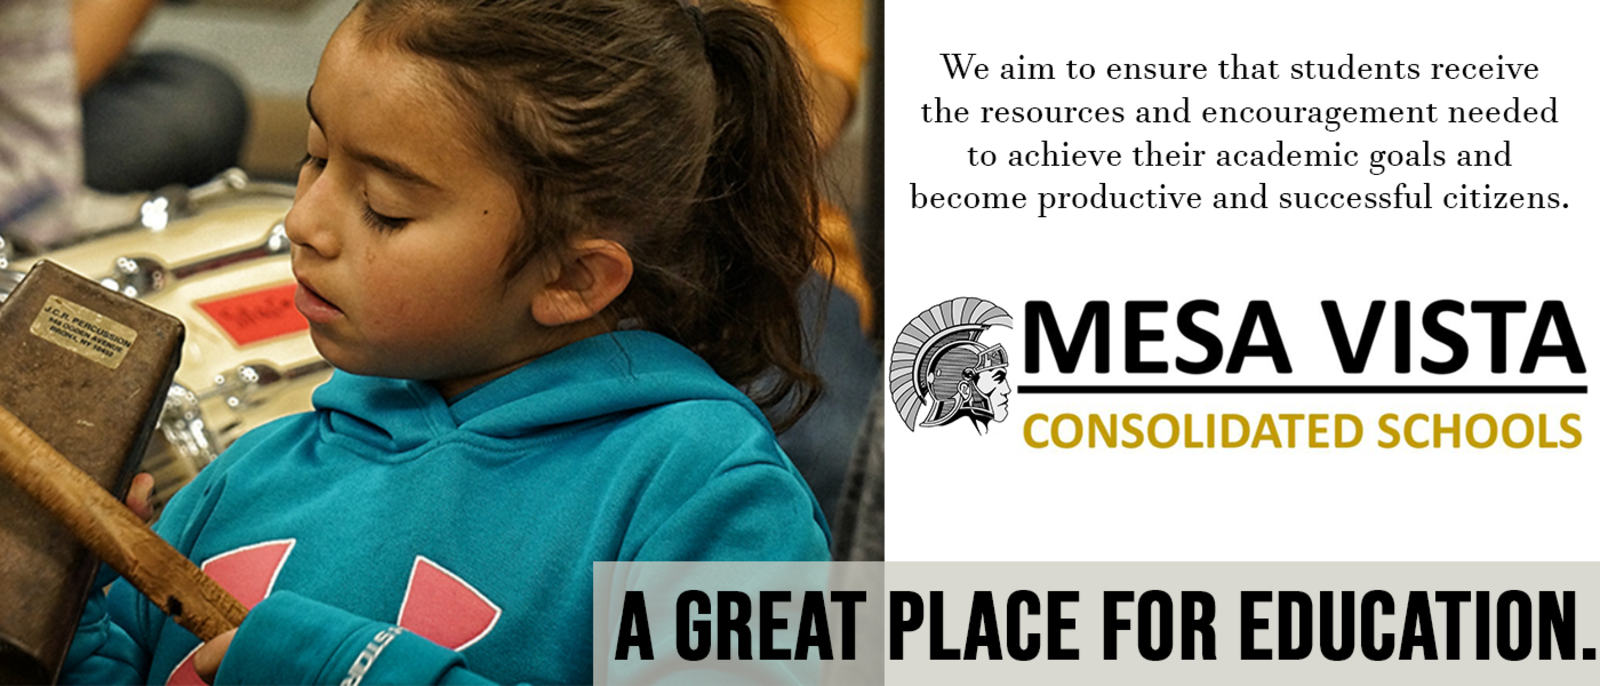 We aim to ensure that students receive the resources and encouragement needed to achieve their academic goals and become productive and successful citizens. MESA VISTA CONSOLIDATED SCHOOLS A GREAT PLACE FOR EDUCATION.